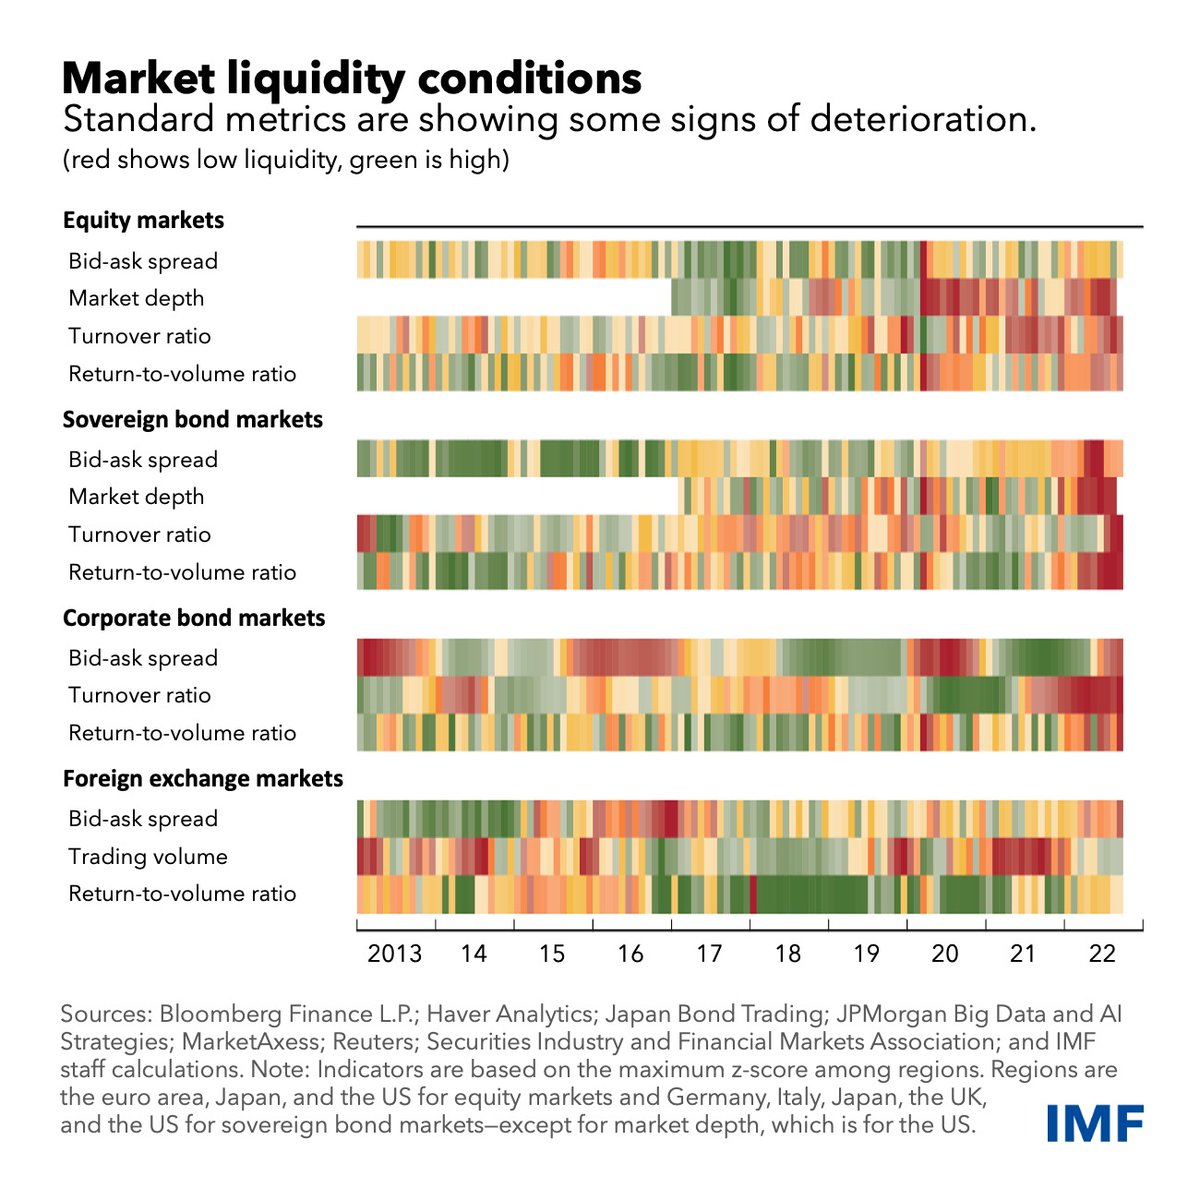 Liquidity is a measure of how well financial markets work, and it has been worsening across different classes of assets like stocks or bonds, but others as well, amid high uncertainty about the economy and monetary policy. #IMFBlog bit.ly/3zlfbvd